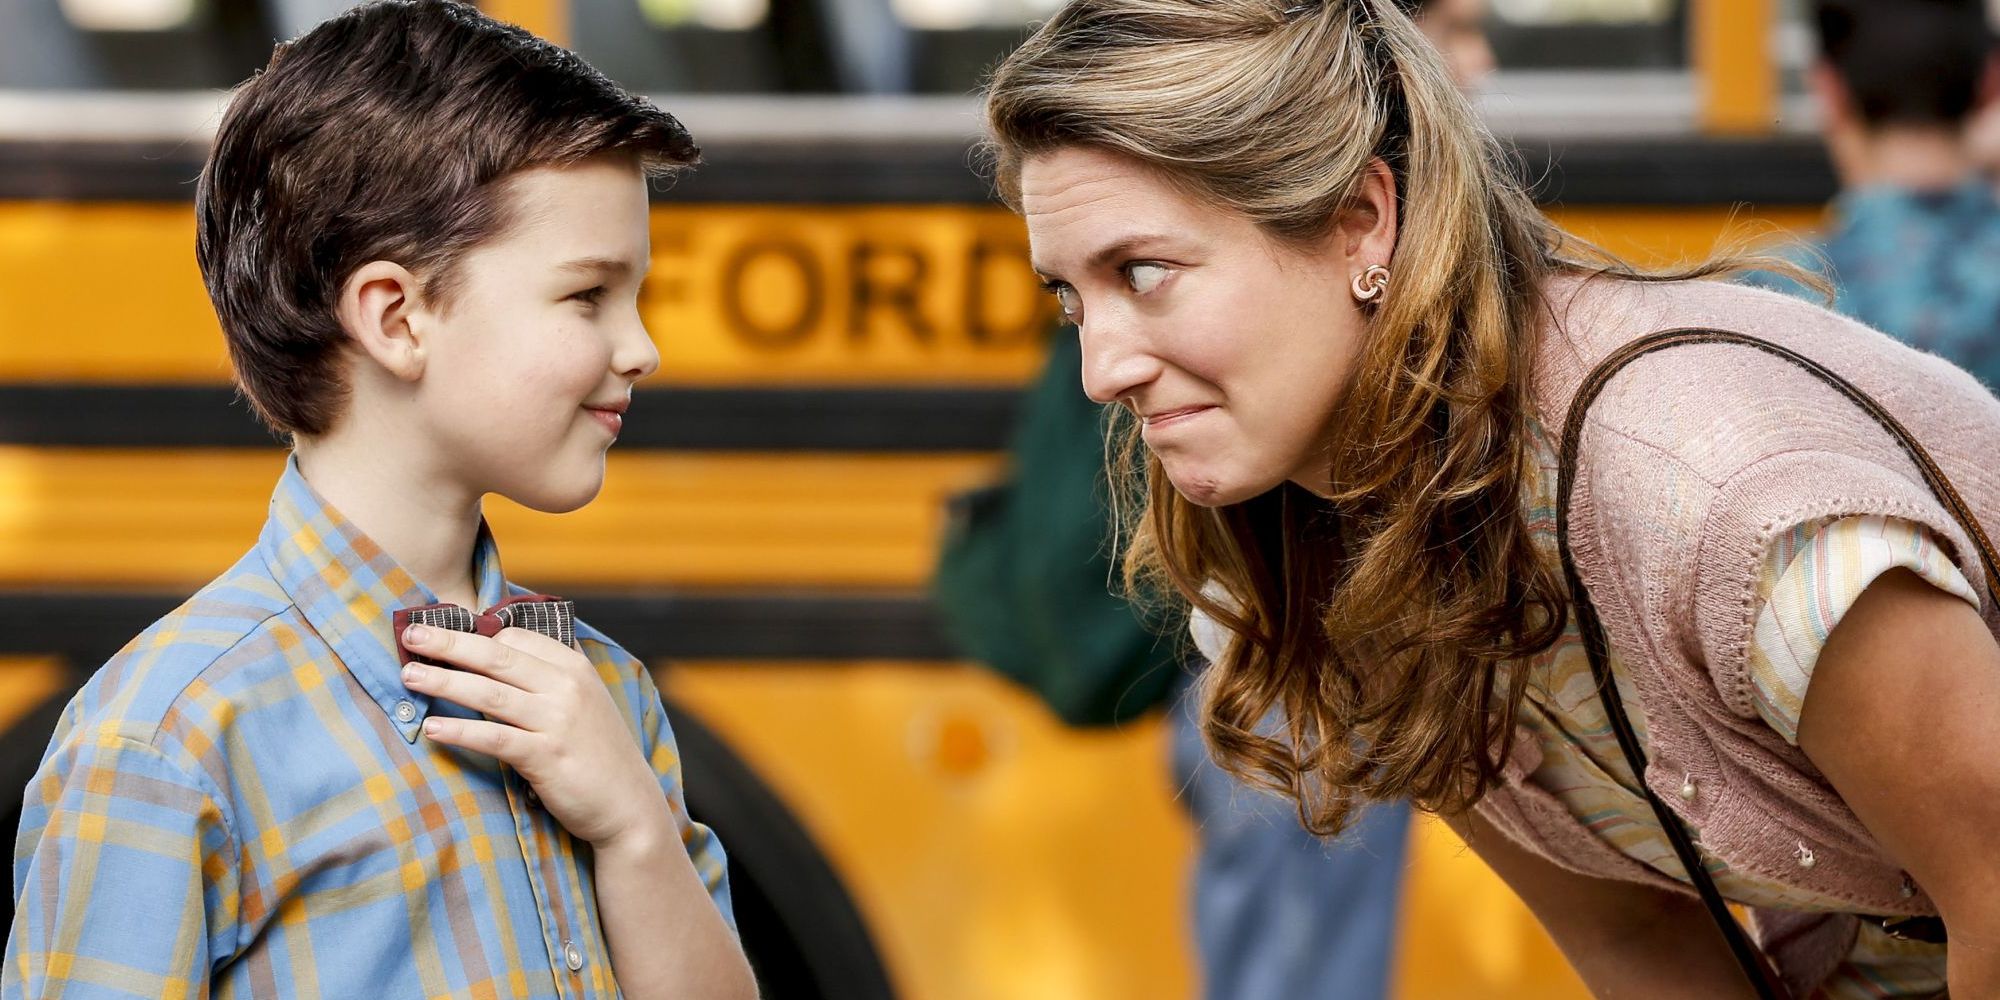 Mary bending down to talk to Sheldon at school in Young Sheldon